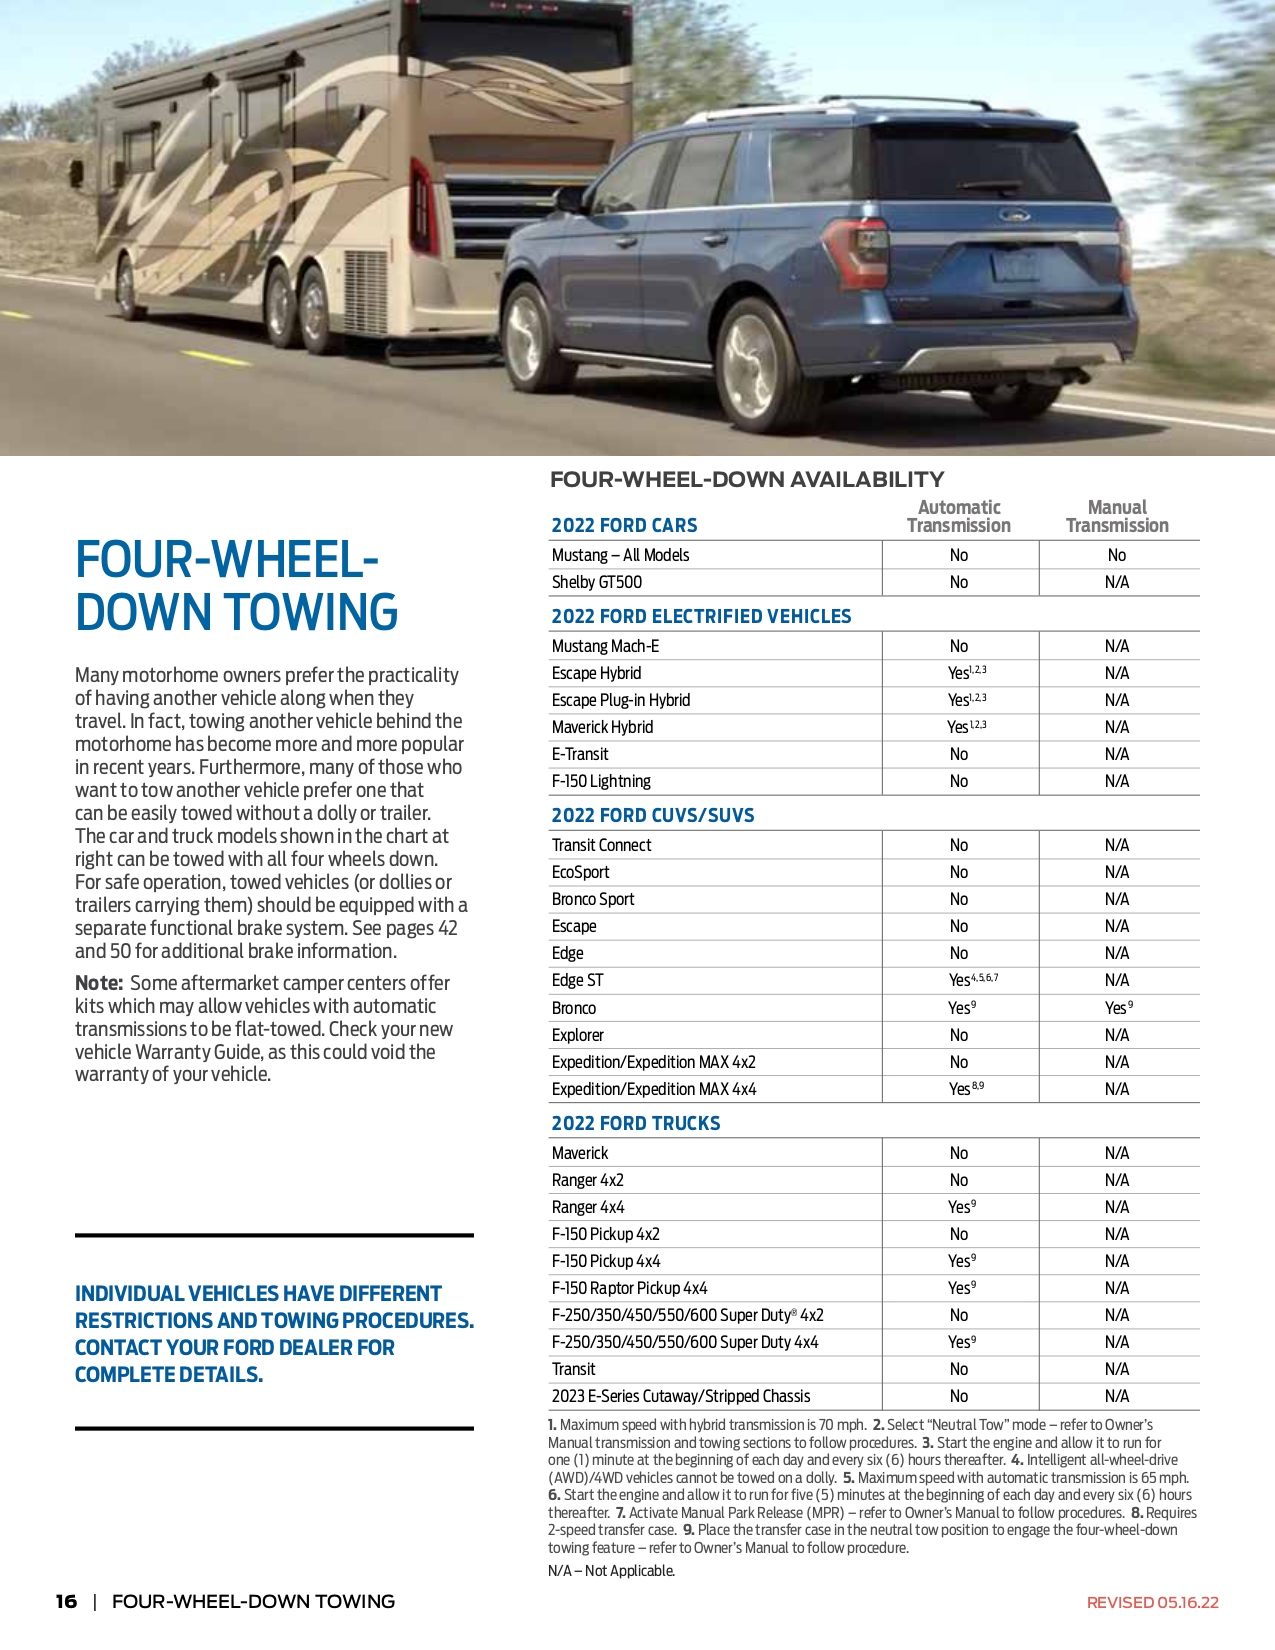 2022 Ford RV & Trailer Towing Guide r8 p16_page-0001.jpg